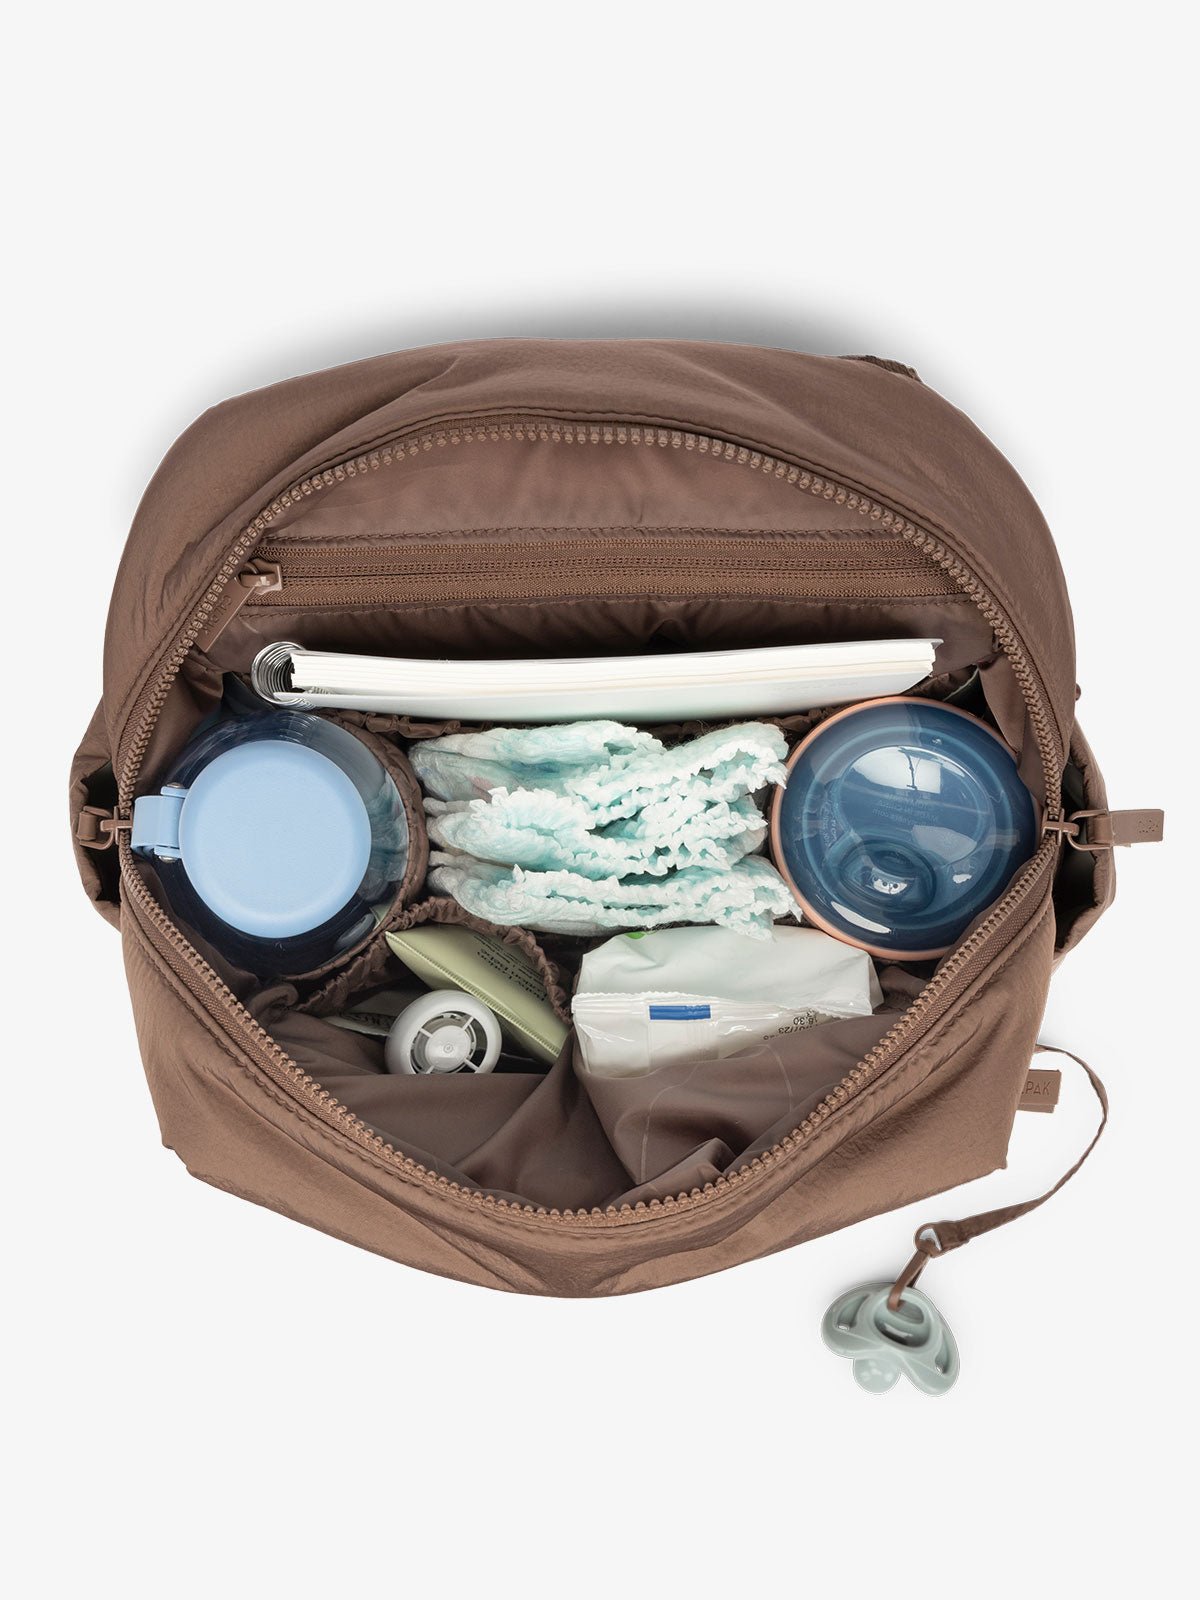 CALPAK mini diaper backpack with multiple interior pockets, bottle pockets, and 11 inch tablet sleeve in hazelnut brown